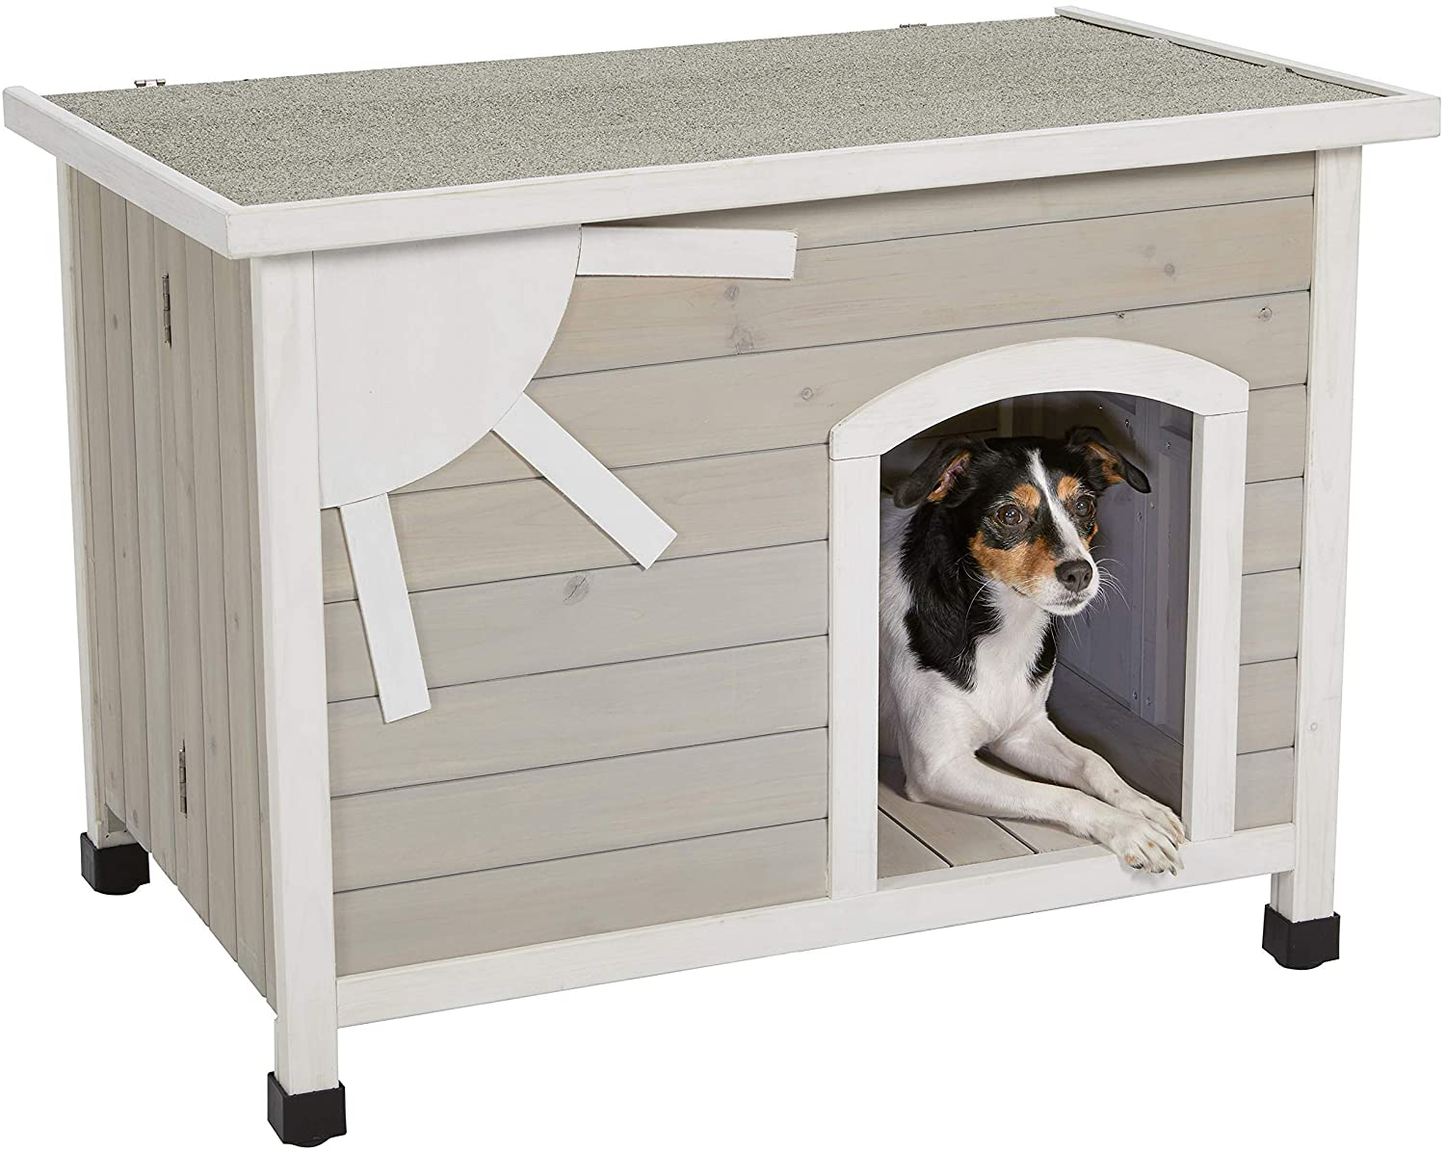 Midwest Homes for Pets Eillo Folding Outdoor Wood Dog House, No Tools Required for Assembly | Dog House Ideal for Small Dog Breeds, Beige (12EWDH-S)